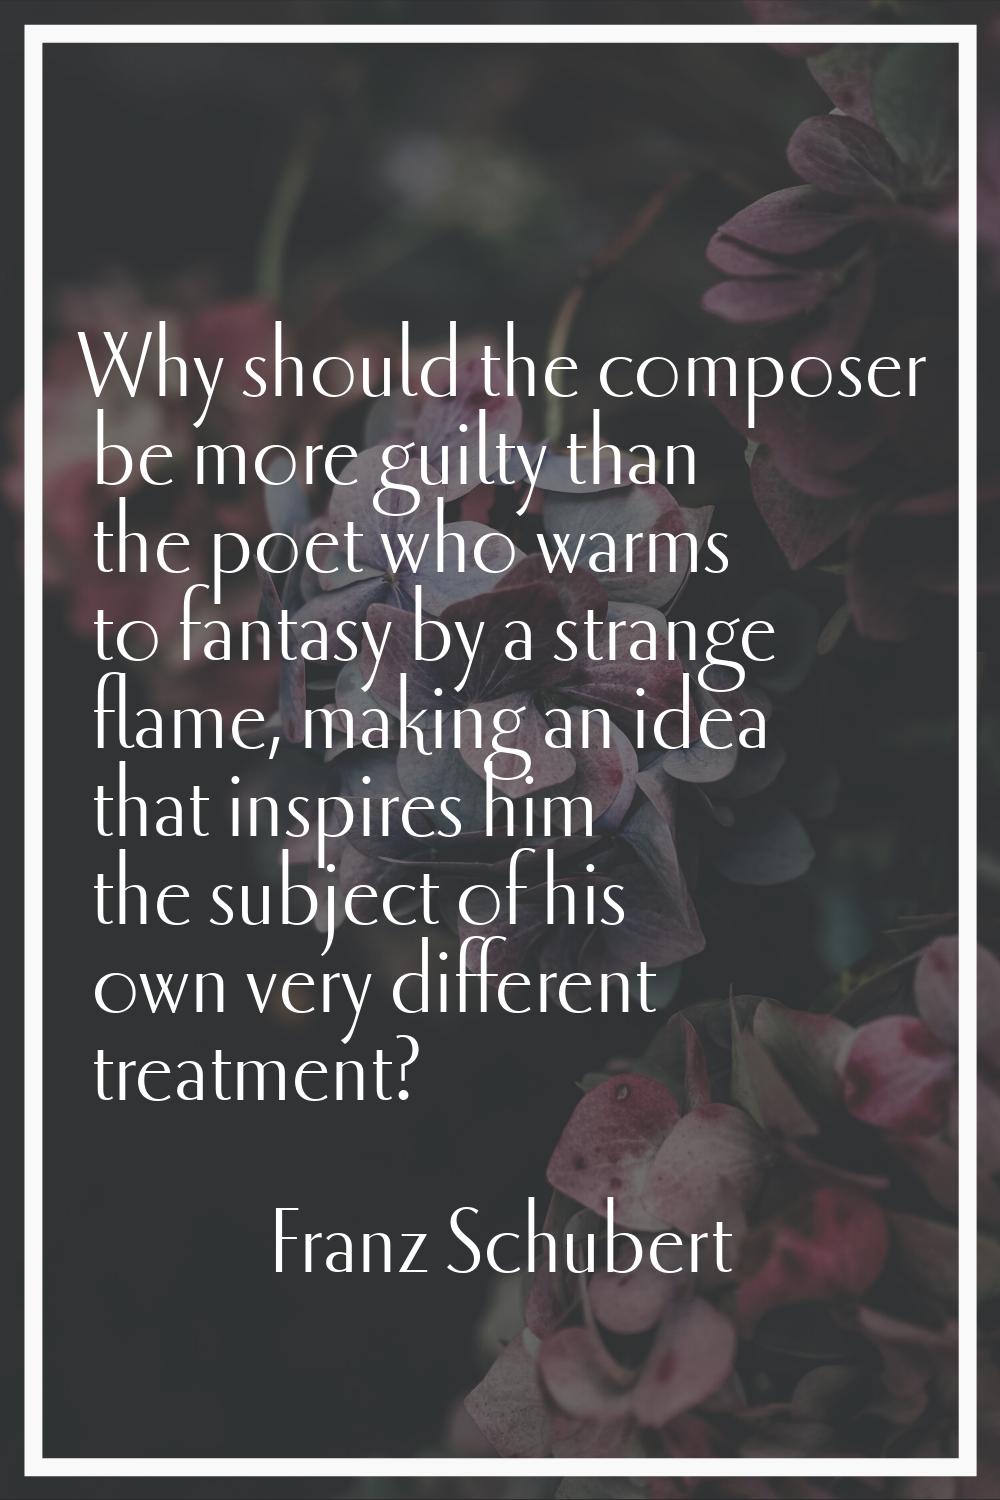 Why should the composer be more guilty than the poet who warms to fantasy by a strange flame, makin